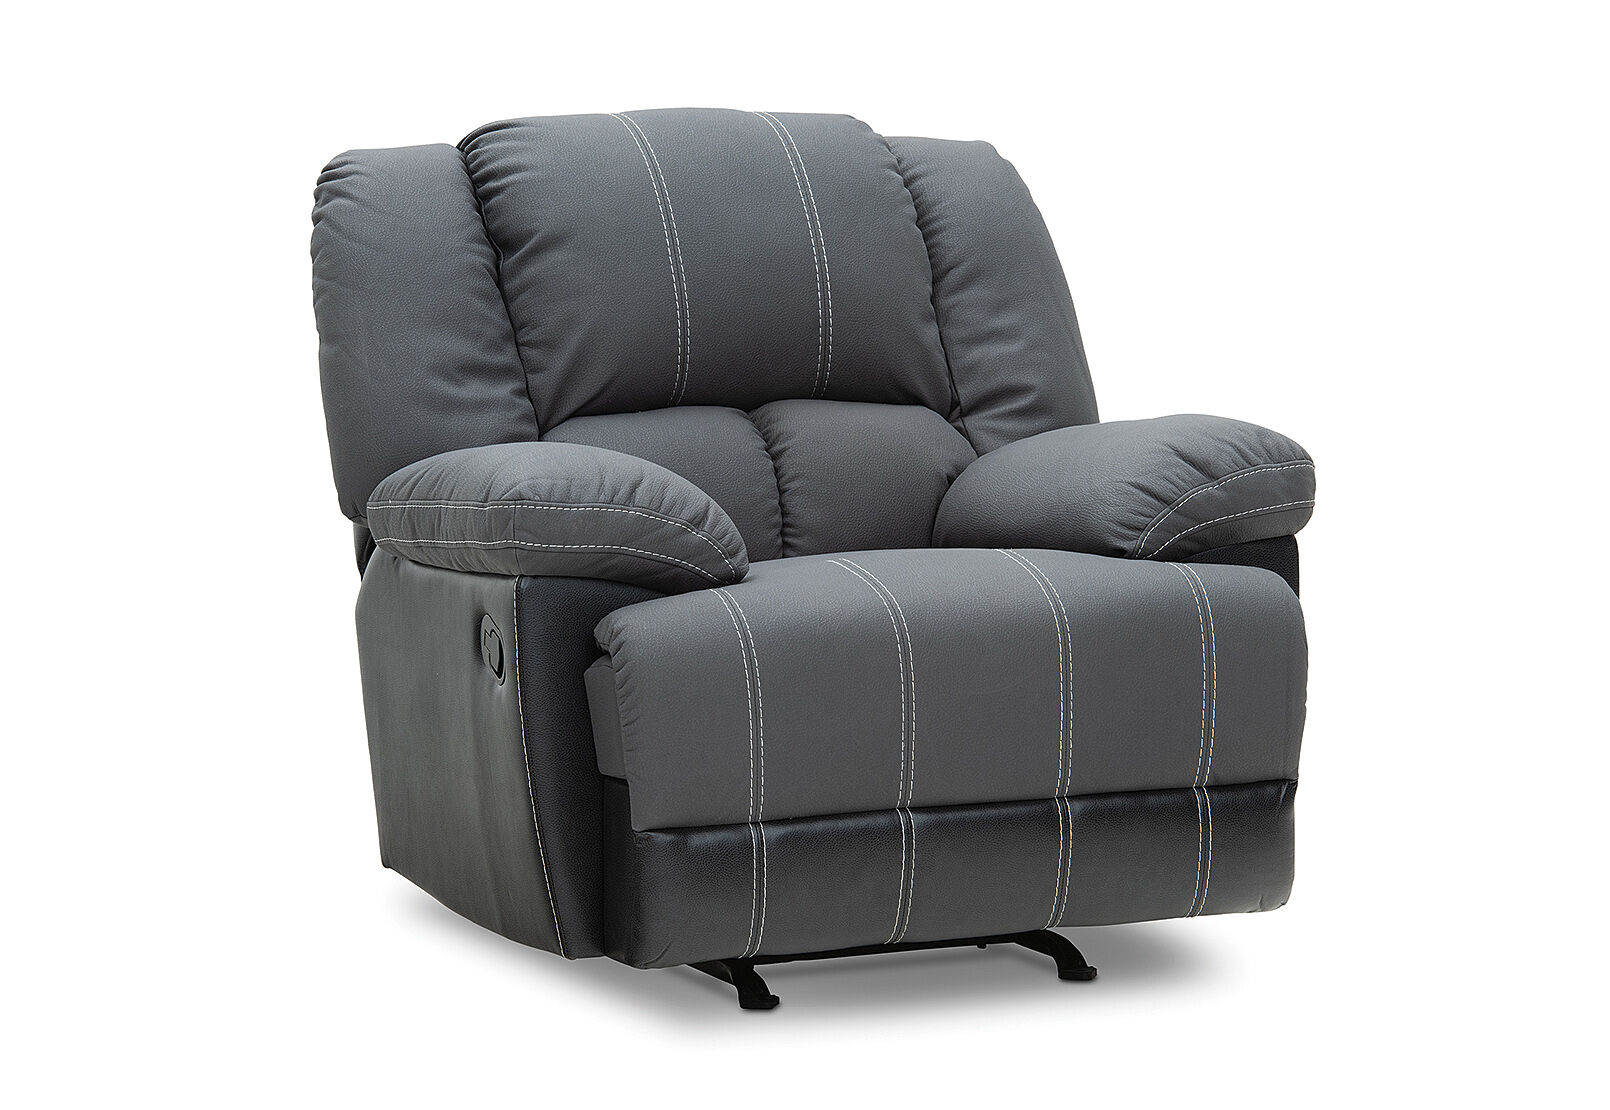 Charcoal Madden Fabric Rocker Recliner, Leather Rocking Chair Australia